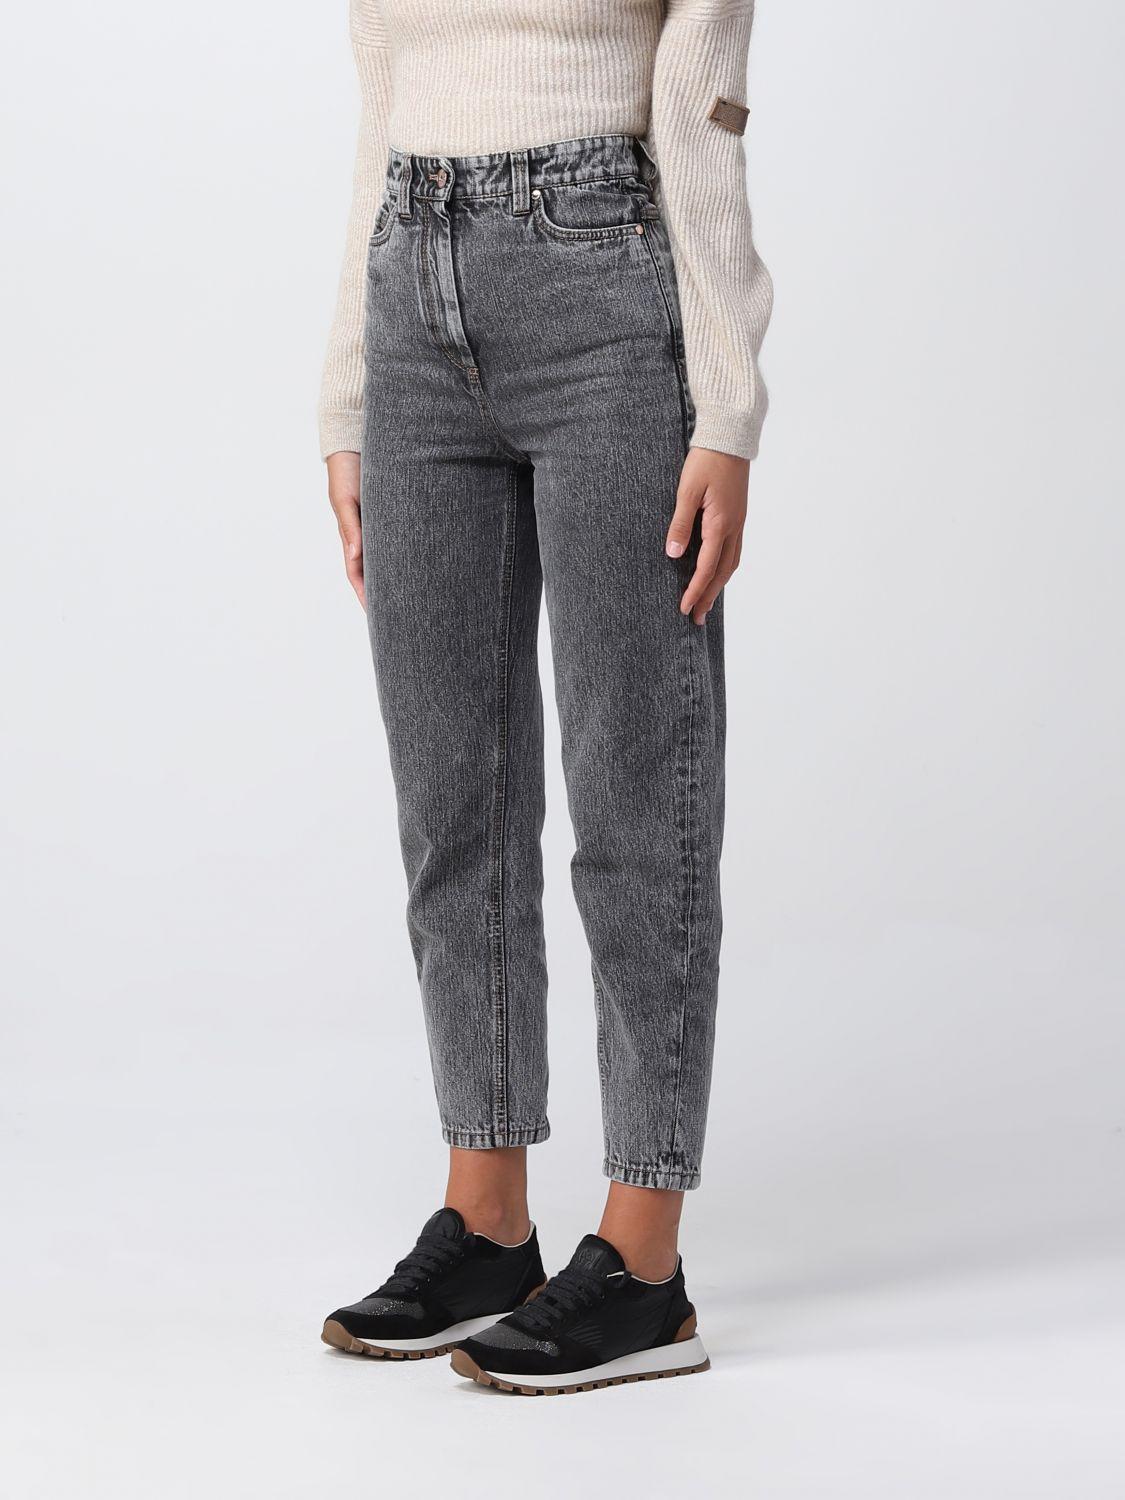 Womens Clothing Trousers Slacks and Chinos Harem pants Brunello Cucinelli Denim Trousers in White 